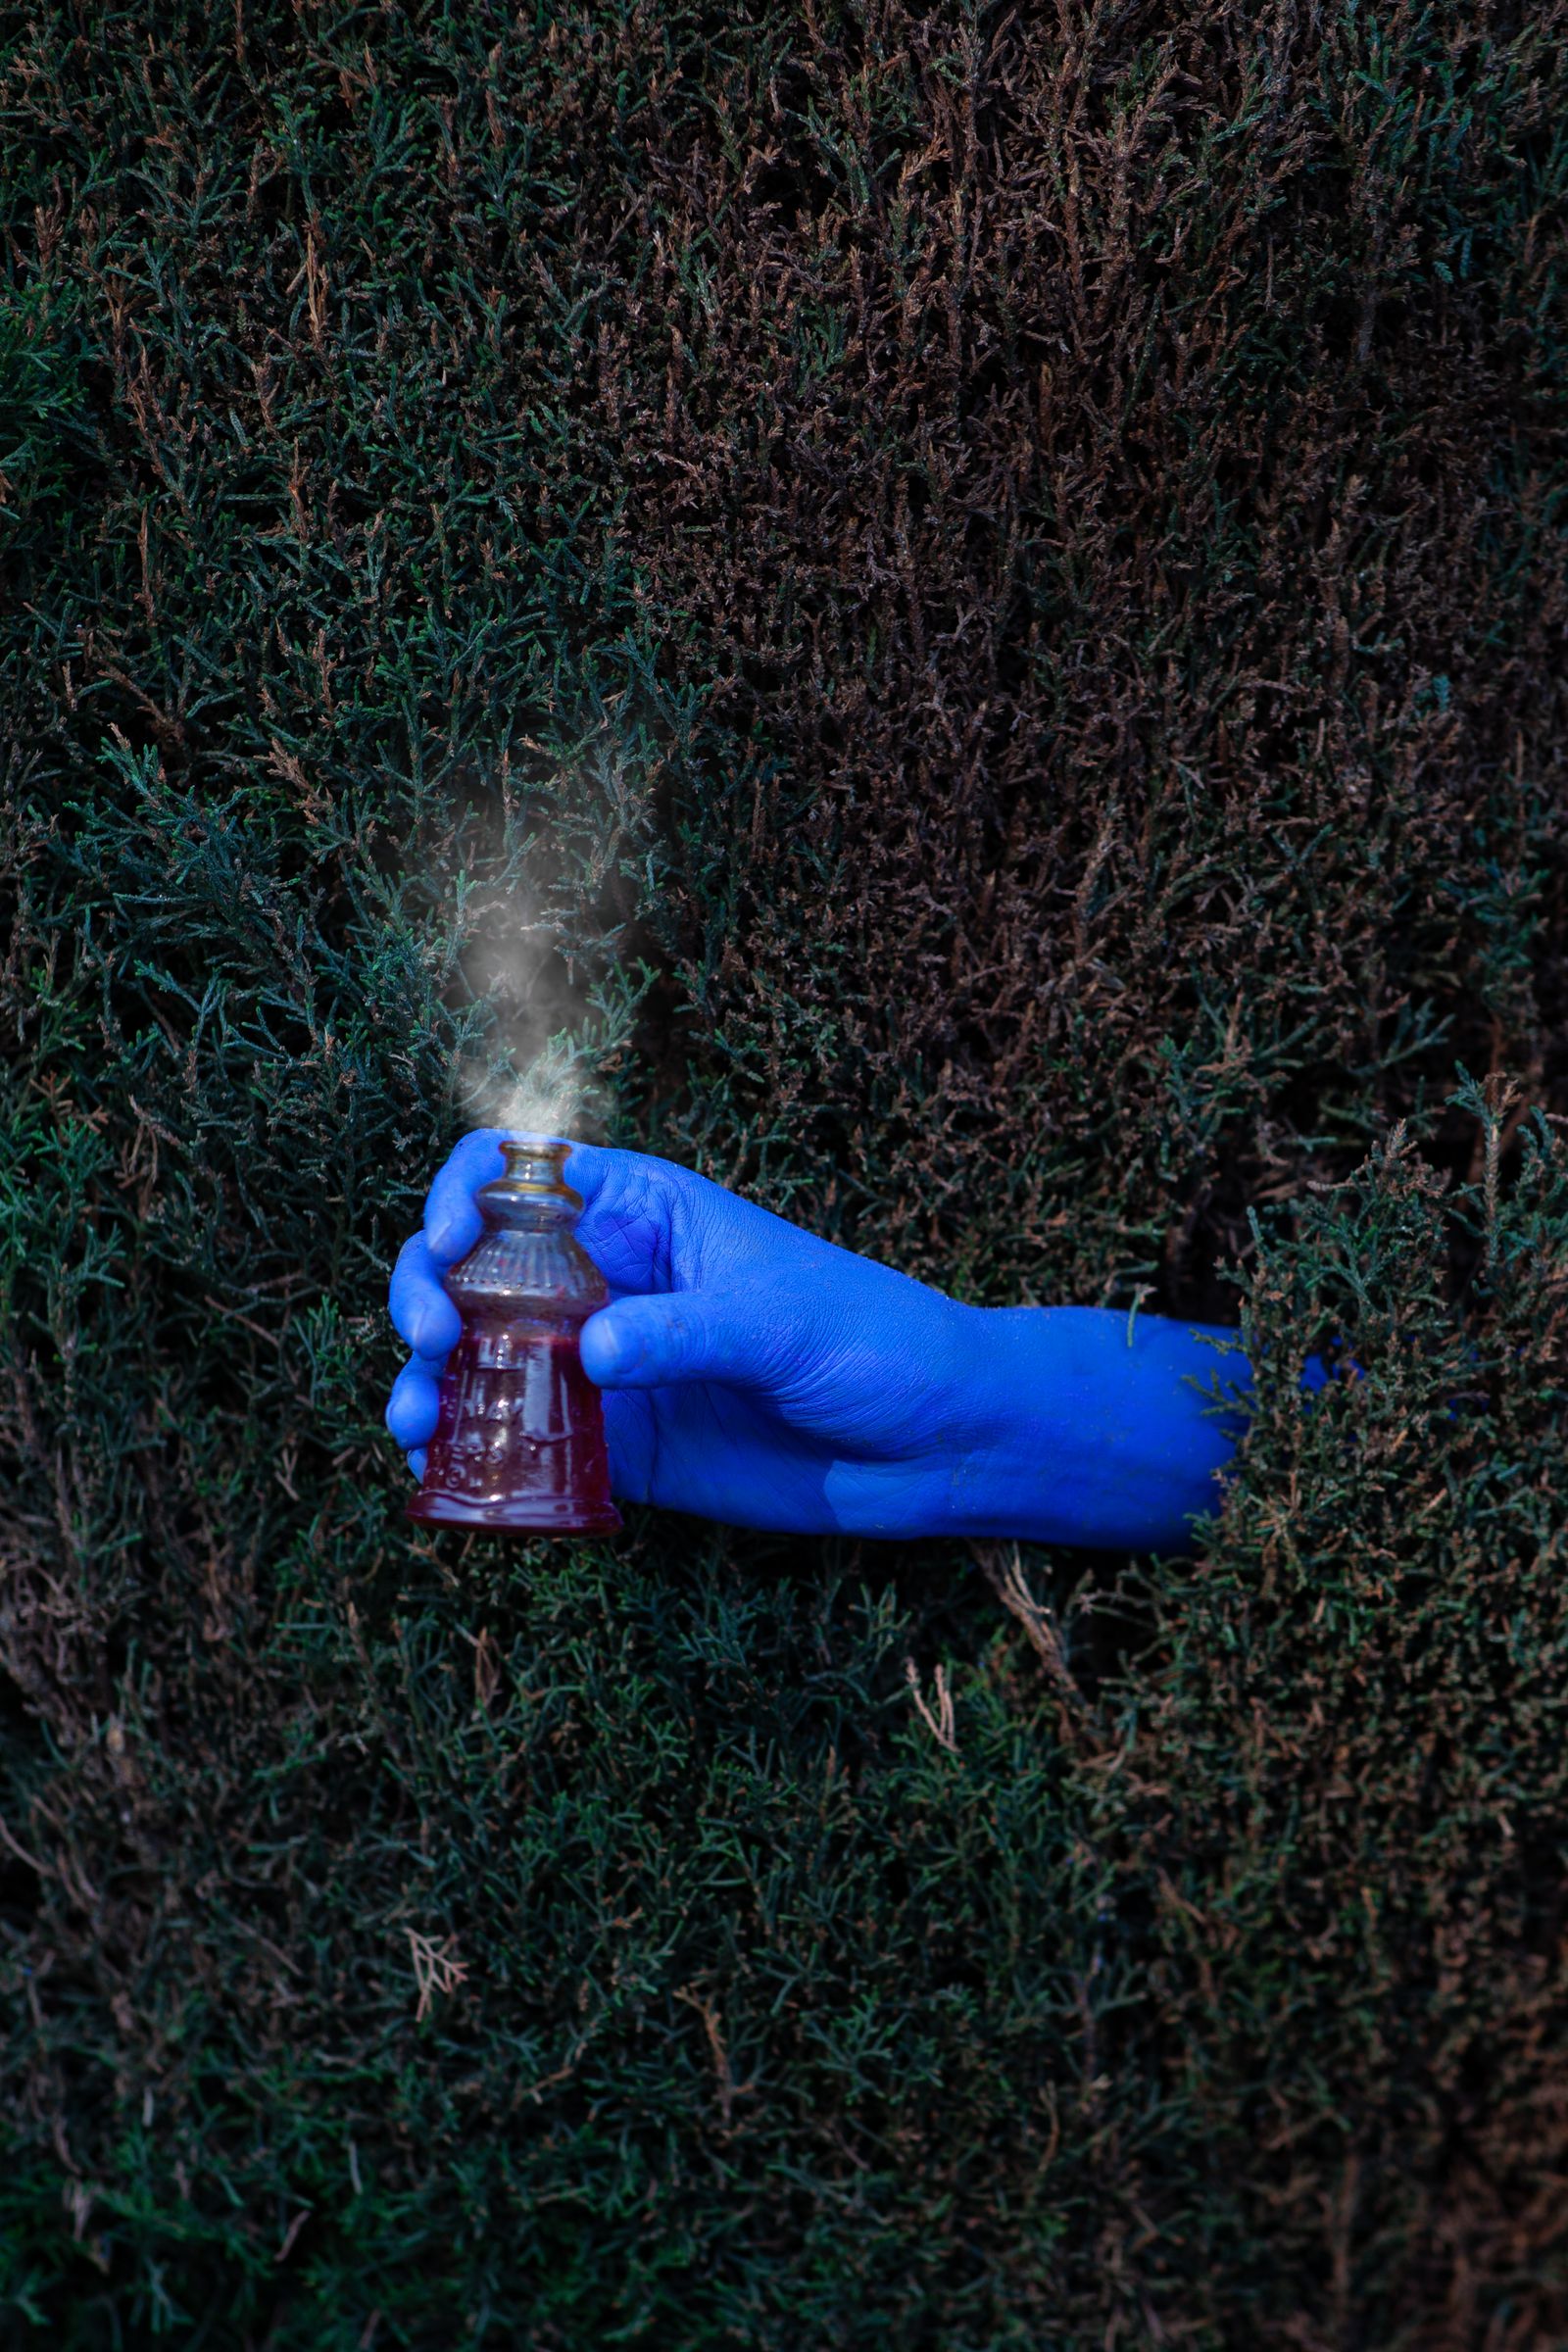 © elsa Kostic - 'Drink Me' potion is a magical liquid in Wonderland that has an unusual effect to make the drinker shrink in size.